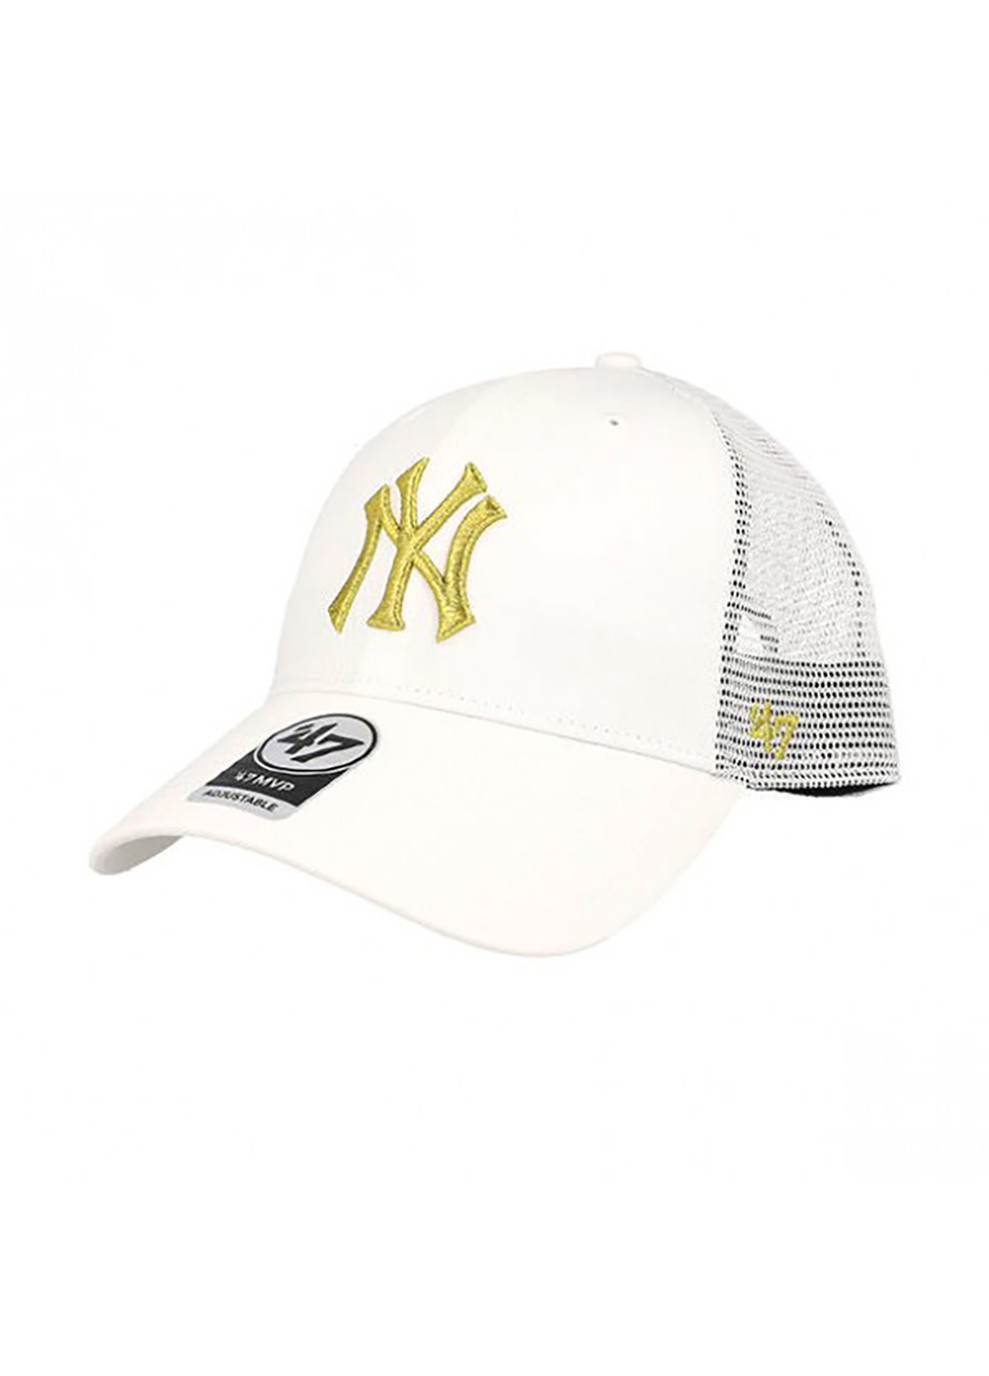 Кепка-тракер NY YANKEES One Size White/Gold 47 Brand (258132738)